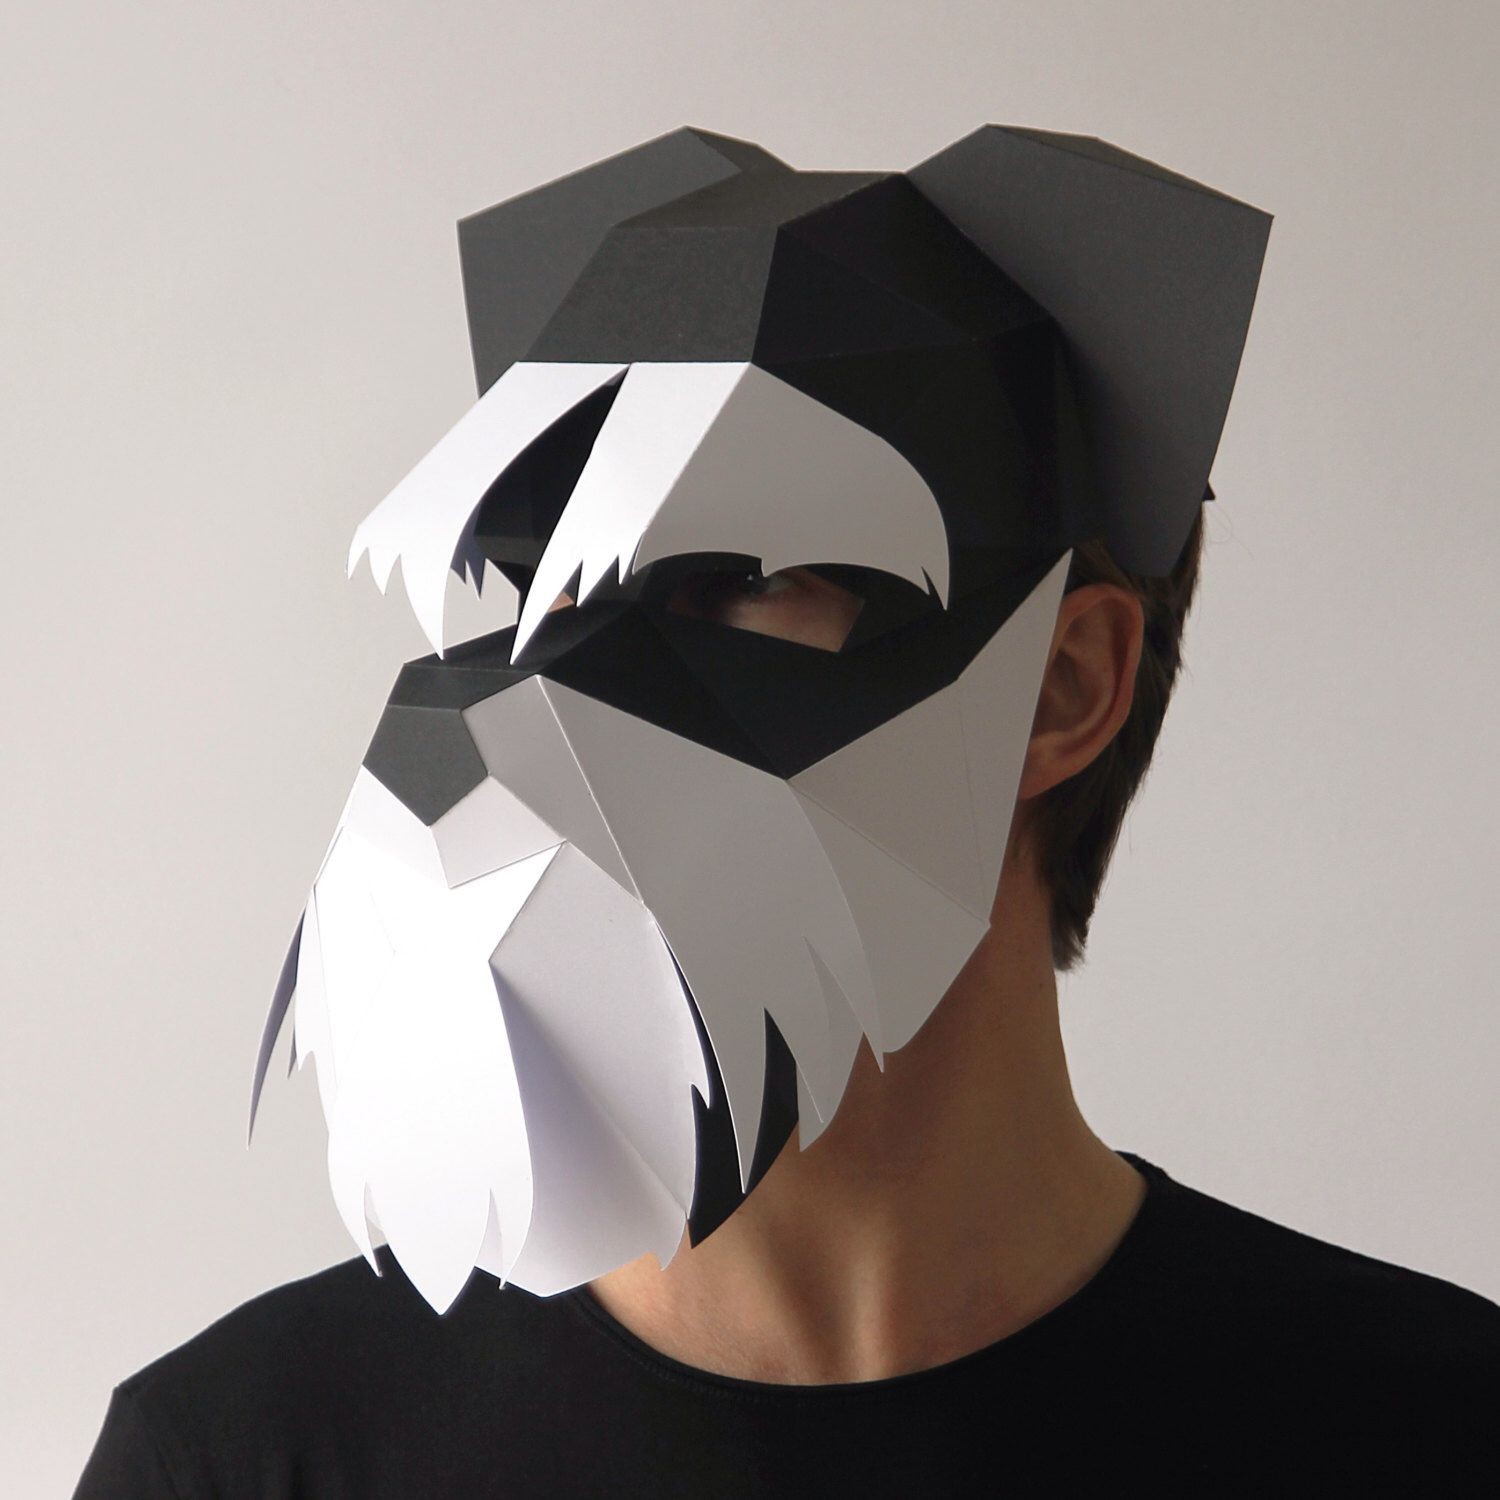 Mask Papercraft Dog Mask Build Your Own Schnauzer 3d Dog Mask From Card Using